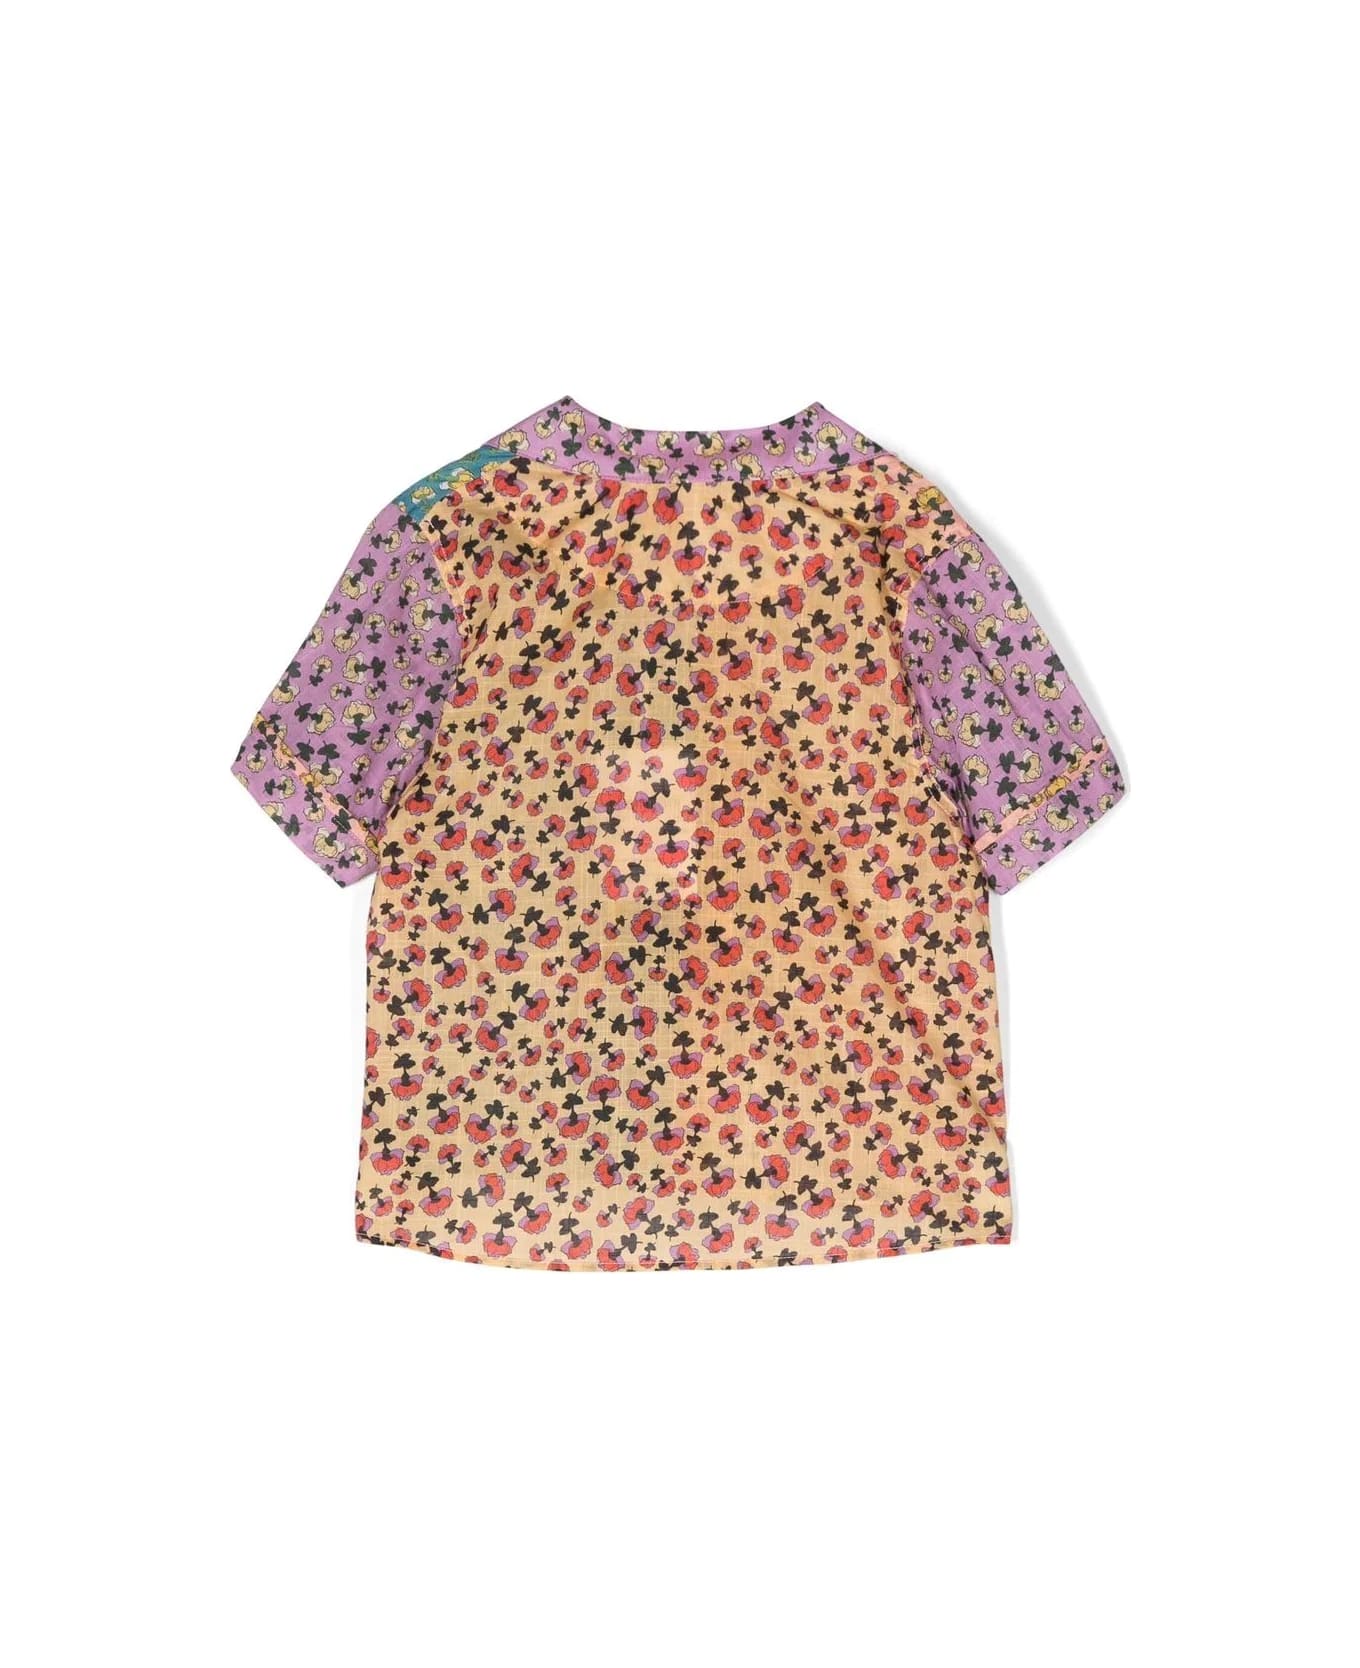 Zimmermann Shirt With Print - Multicolor